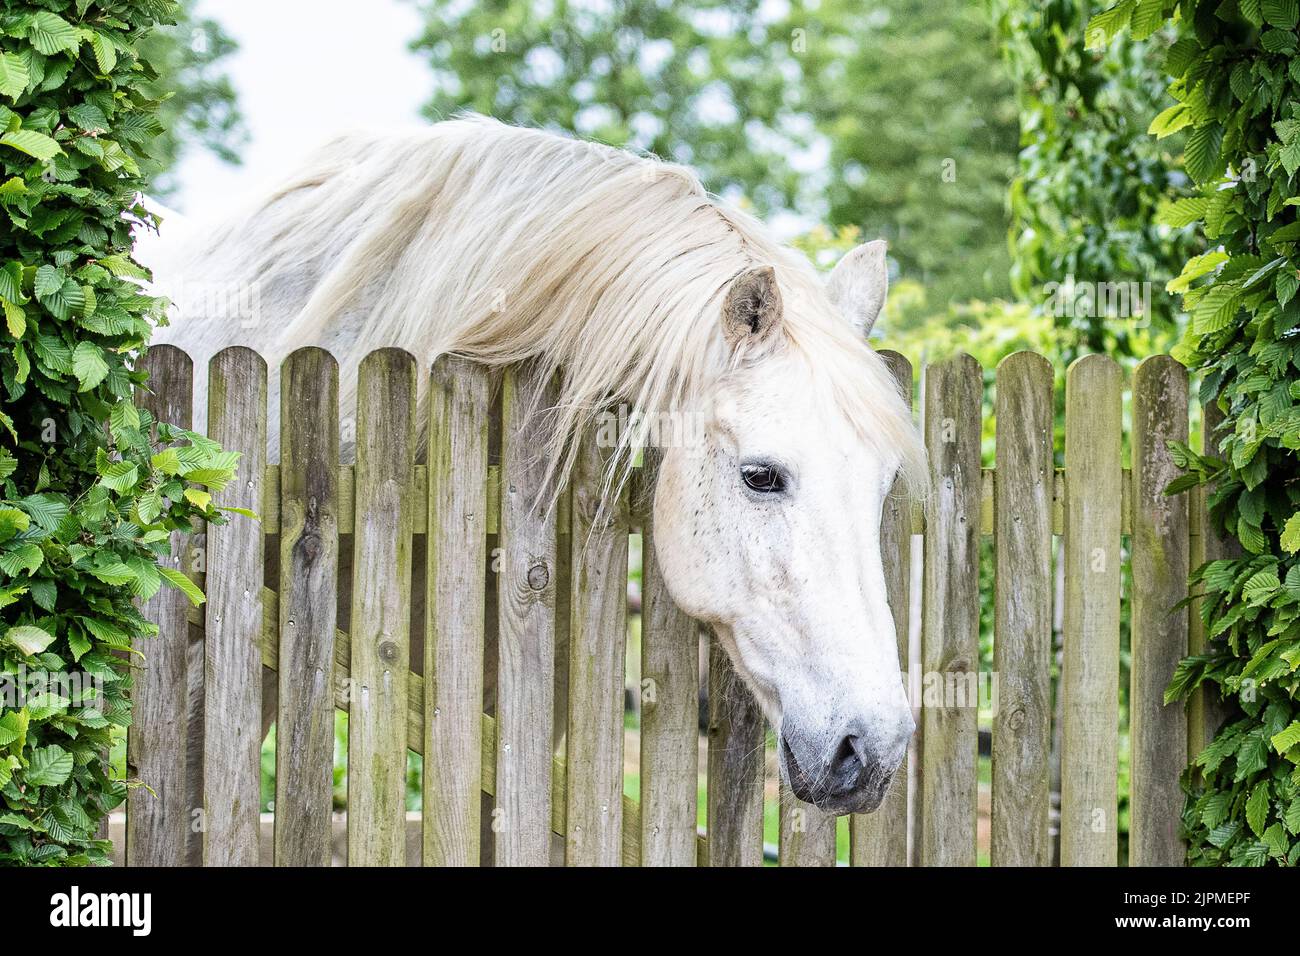 head shot of a grey horse leaning over gate Stock Photo